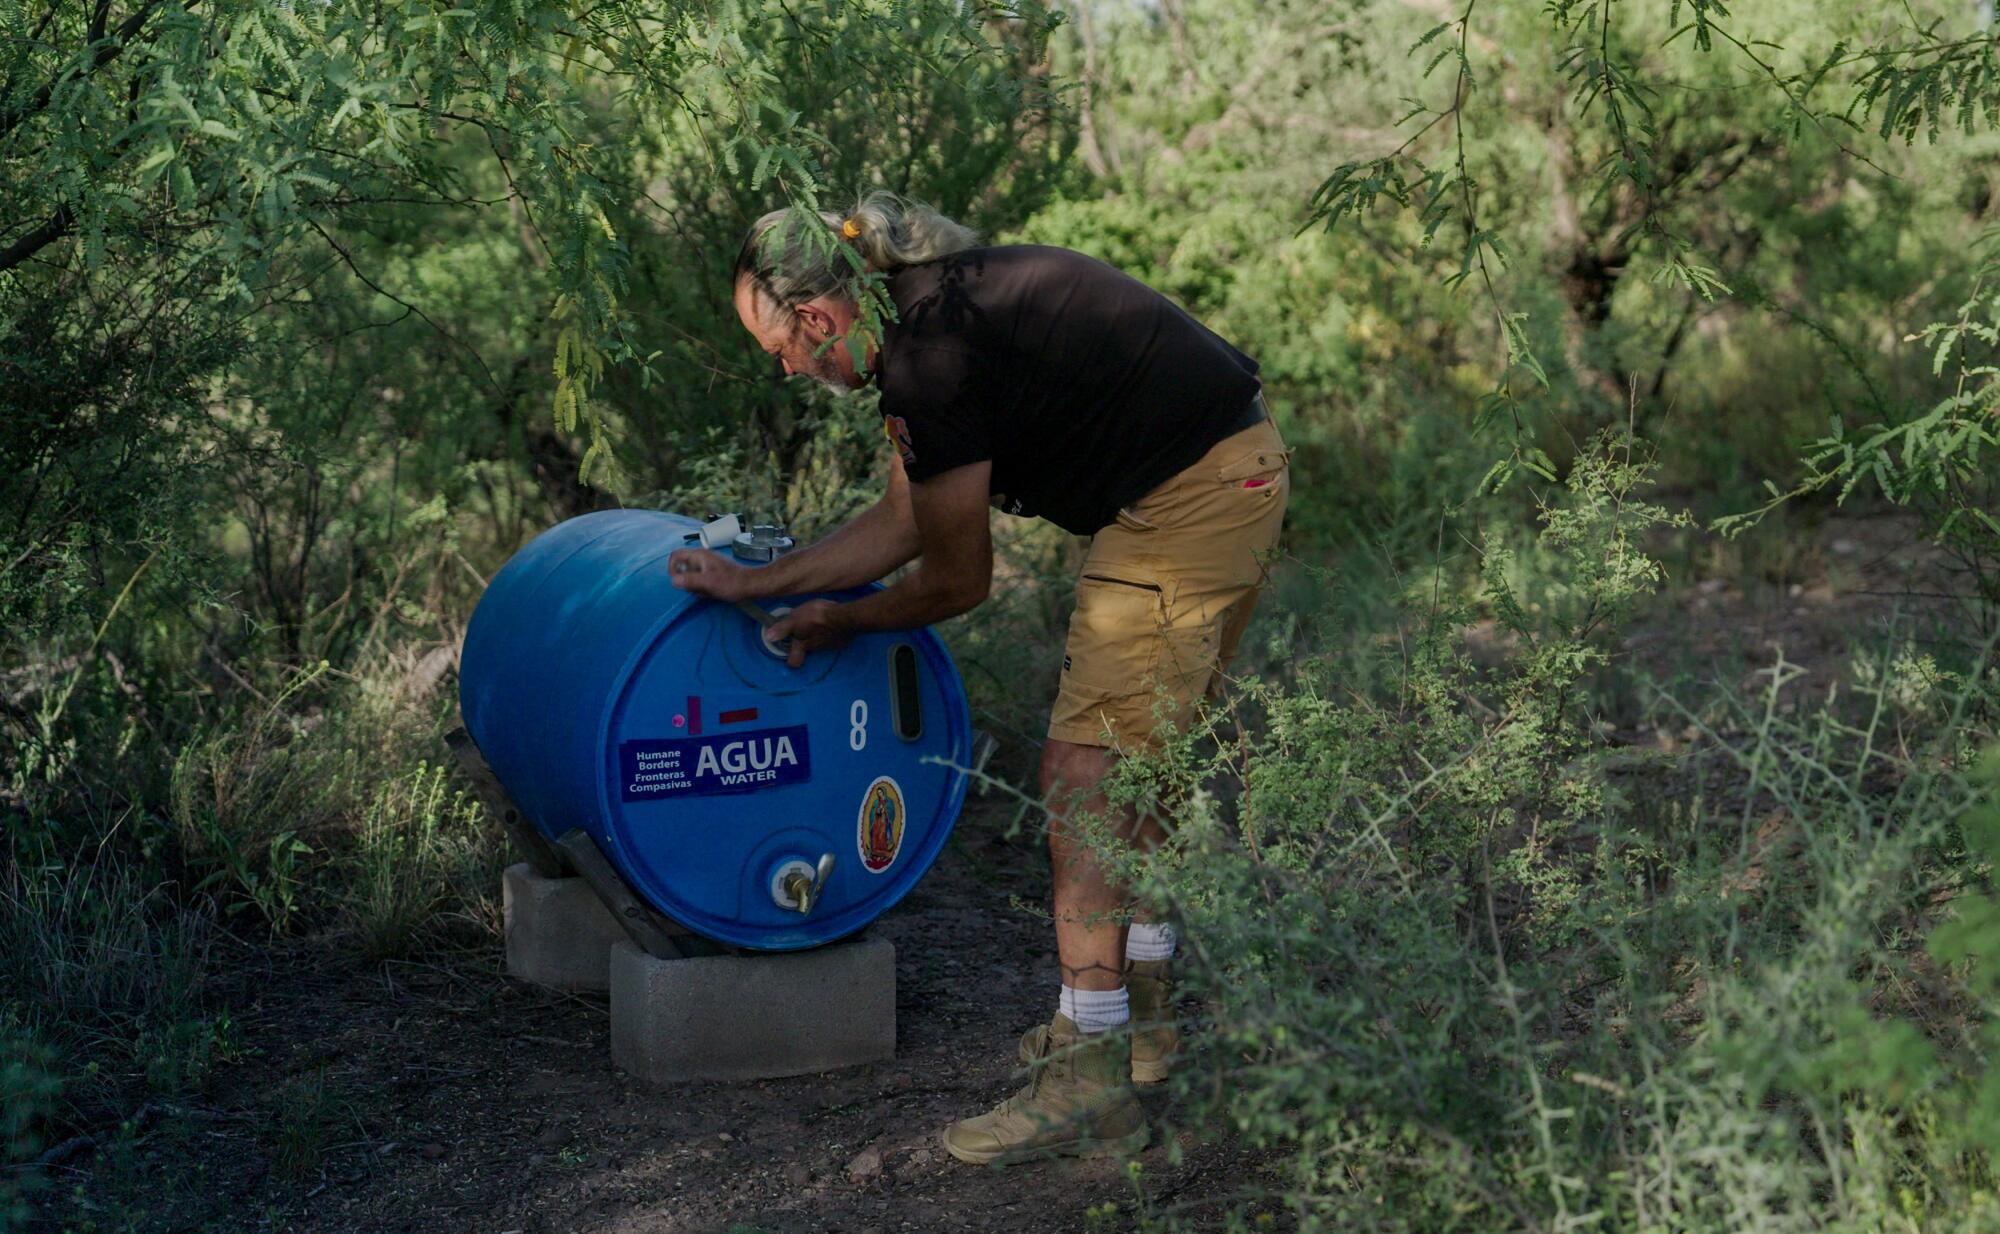 A man checks a water station in the desert south of Tucson